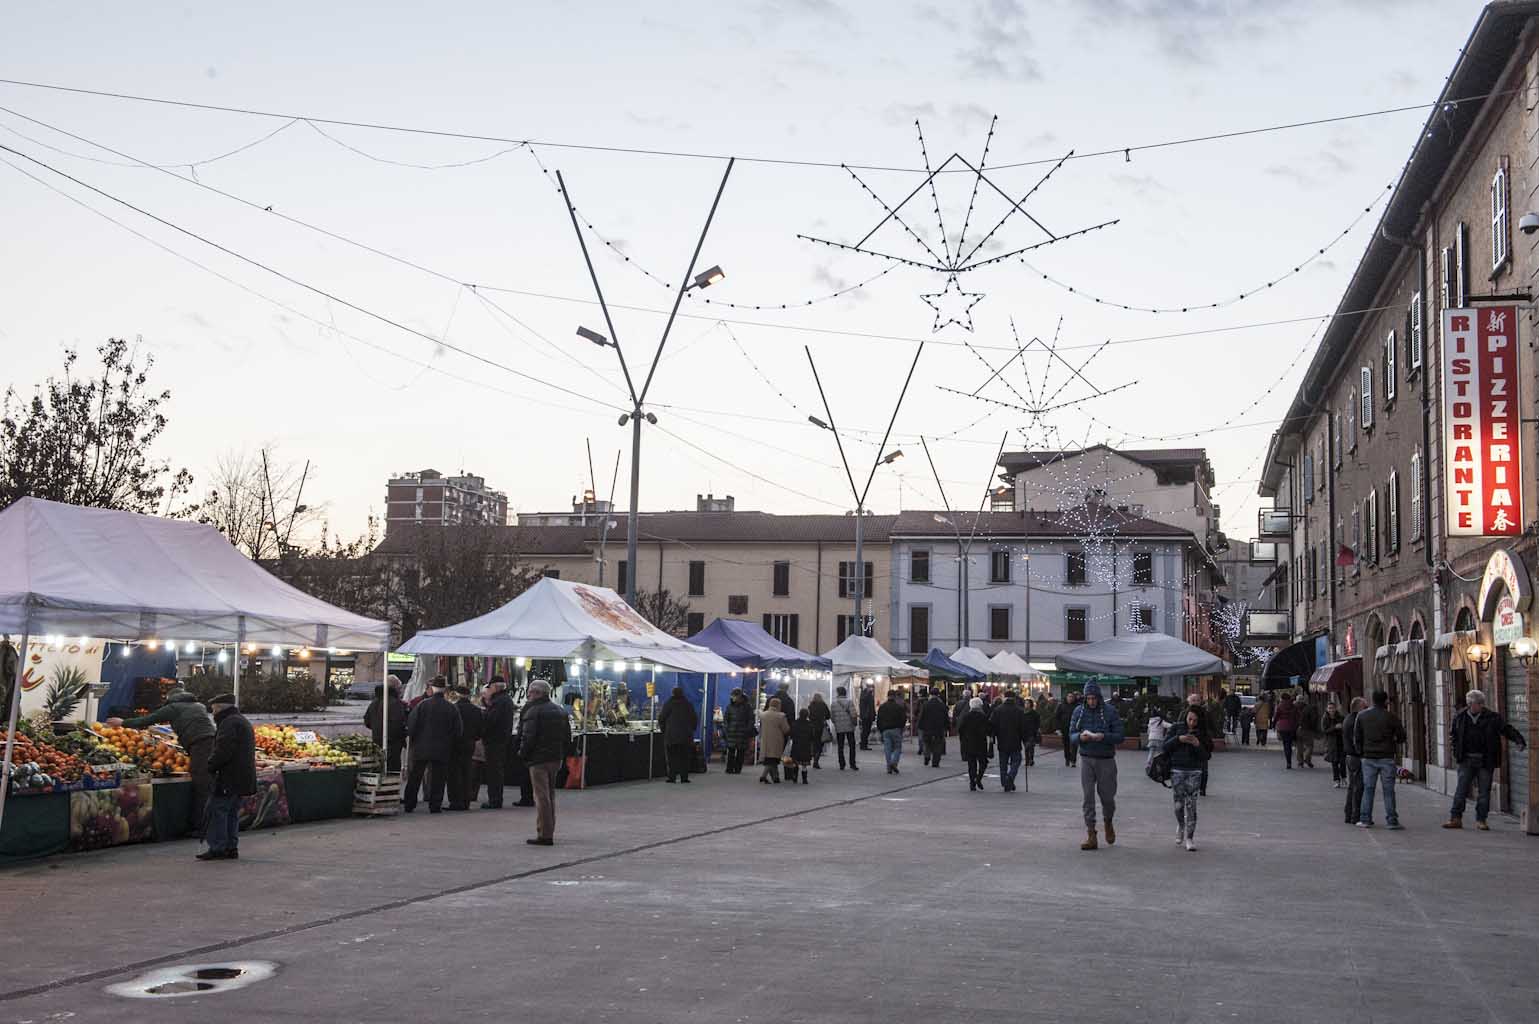 Bye Bye Autunno: a Cinisello street food e mercatino in piazza Gramsci